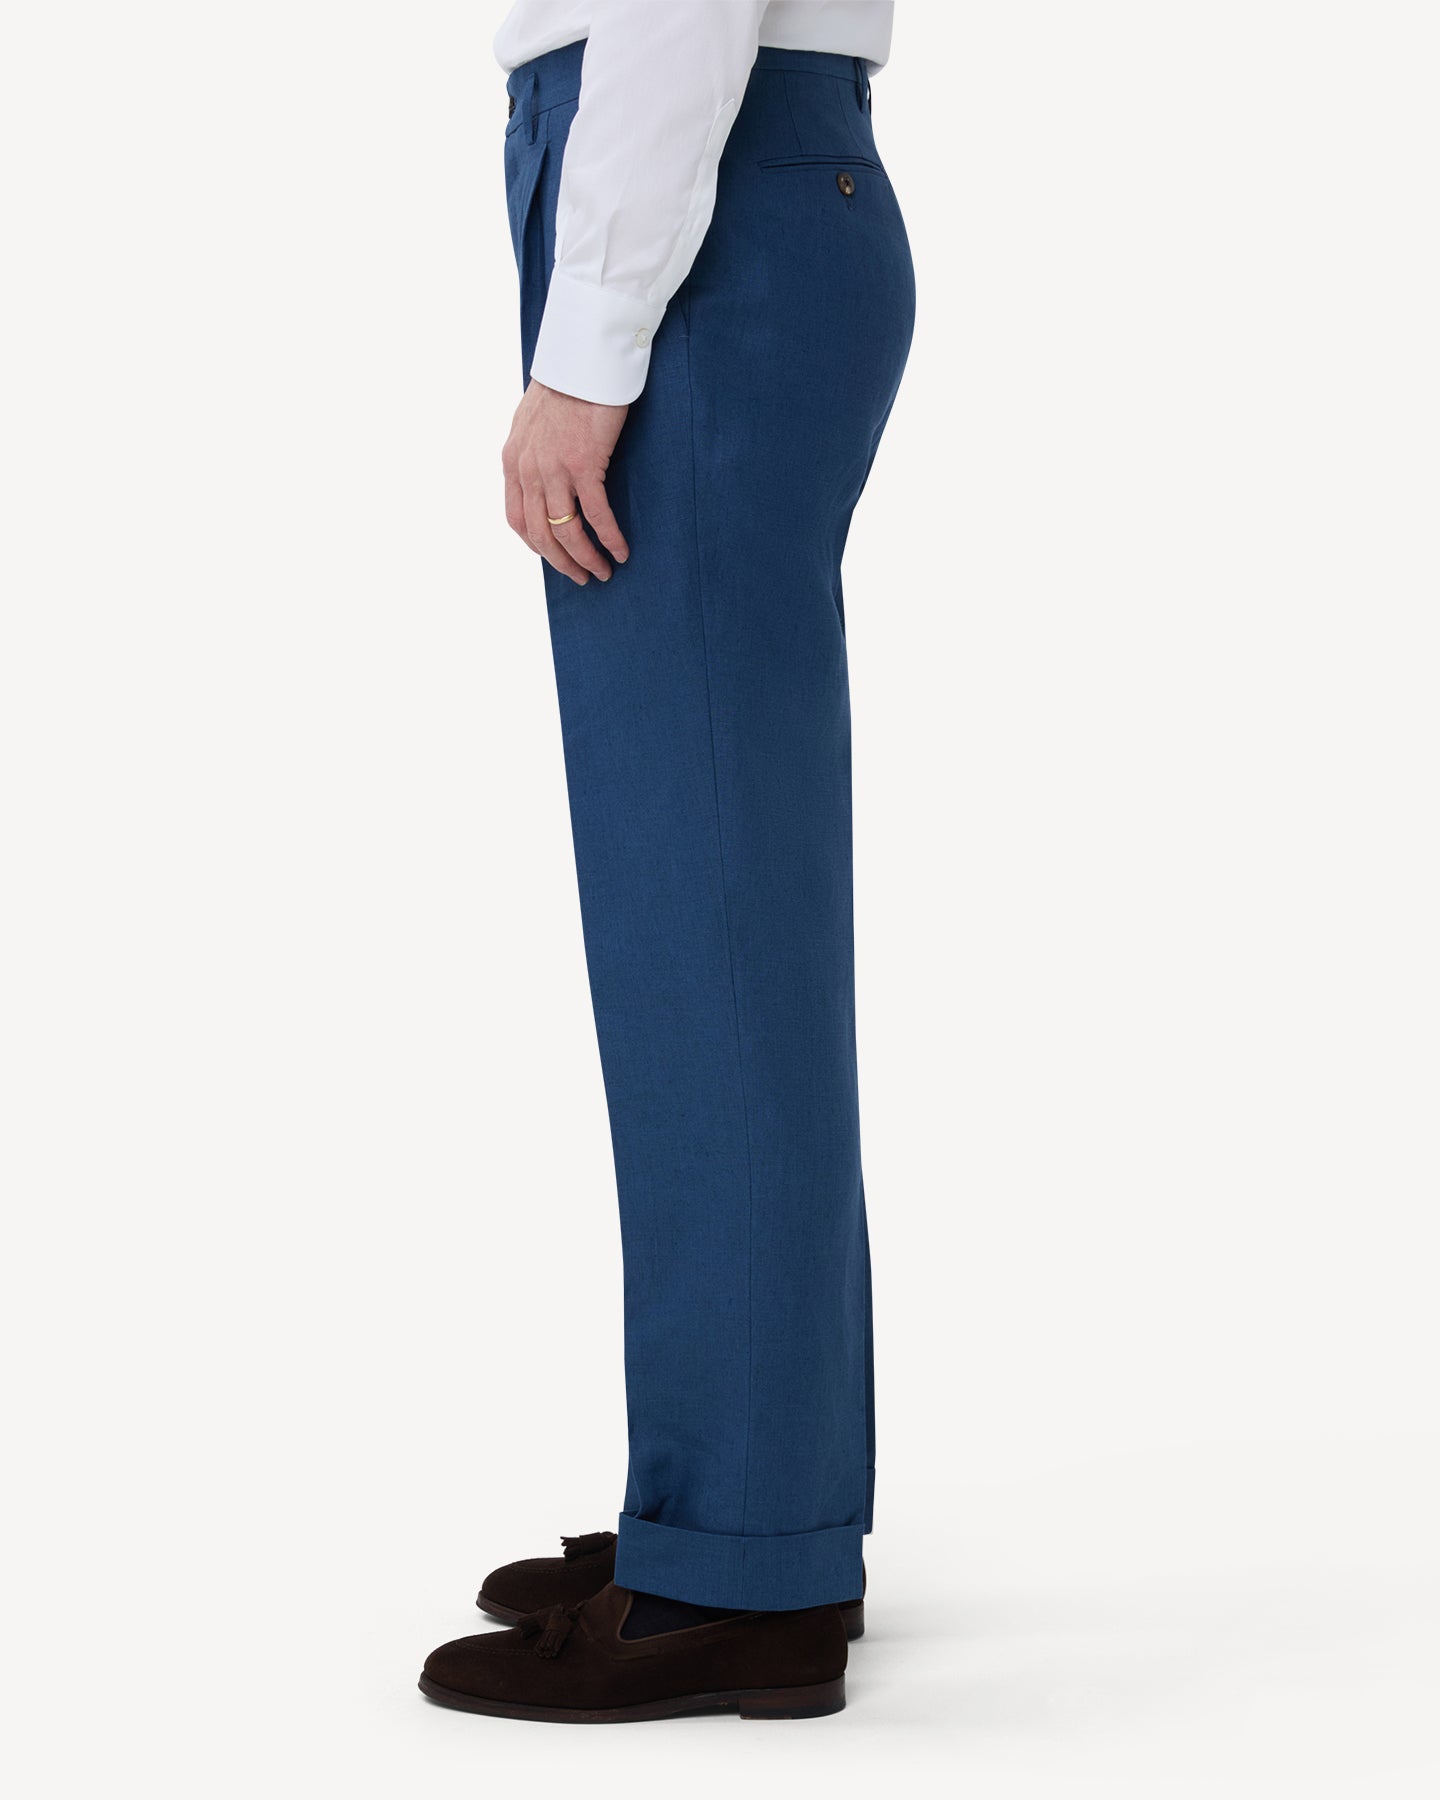 The side of blueberry linen trousers with double pleats and belt loops